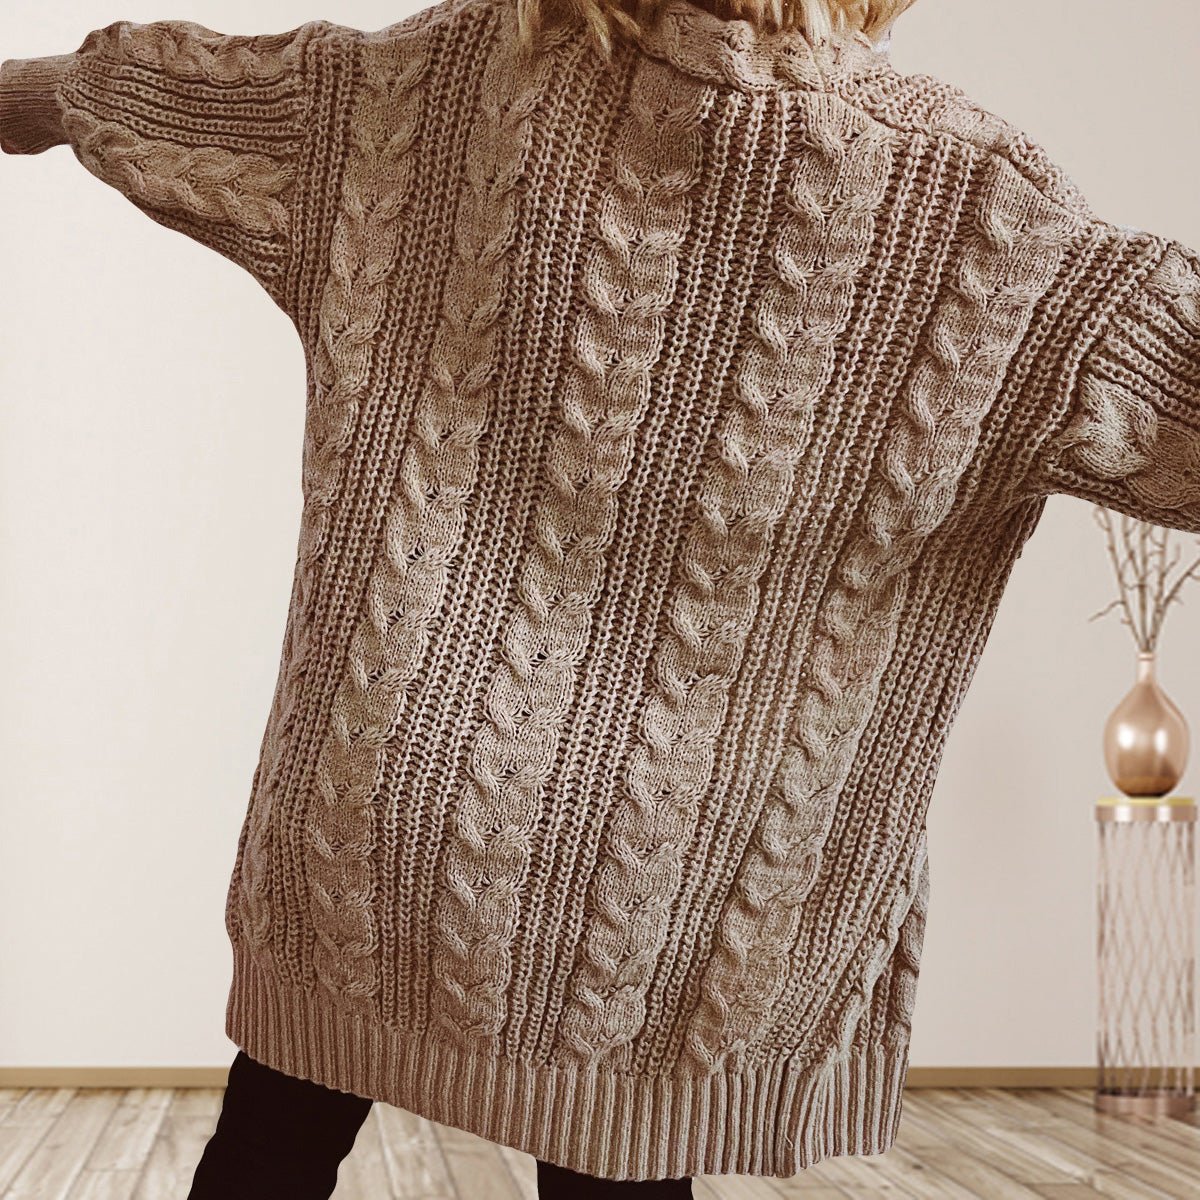 Cable - Knit Open Front Dropped Shoulder Cardigan - Admiresty